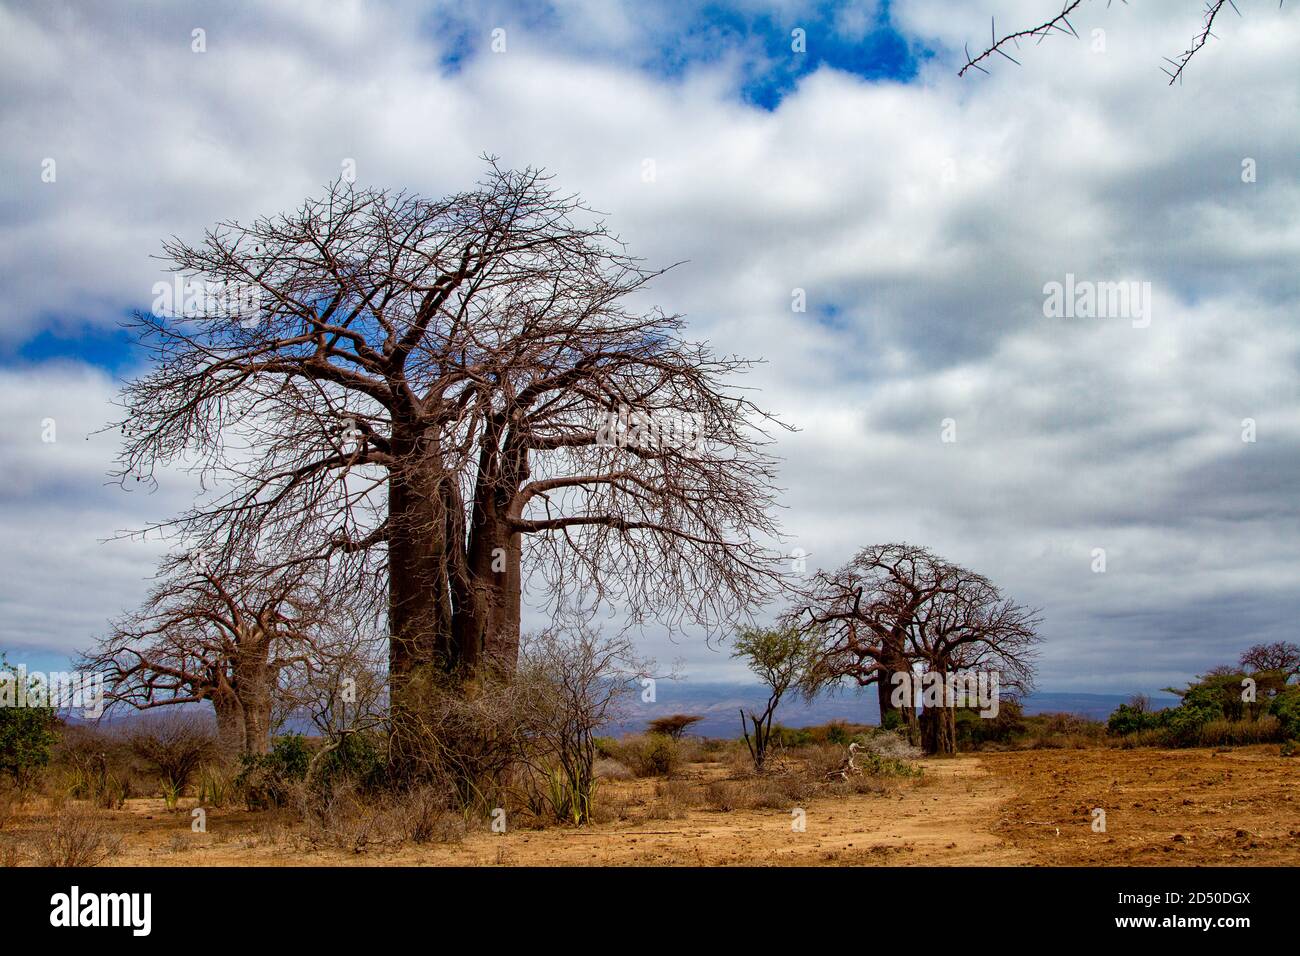 Baobab tree (Adansonia digitata). This tree is found in the hot, dry regions of Sub-Saharan Africa. It has a large trunk for storing water. Photograph Stock Photo